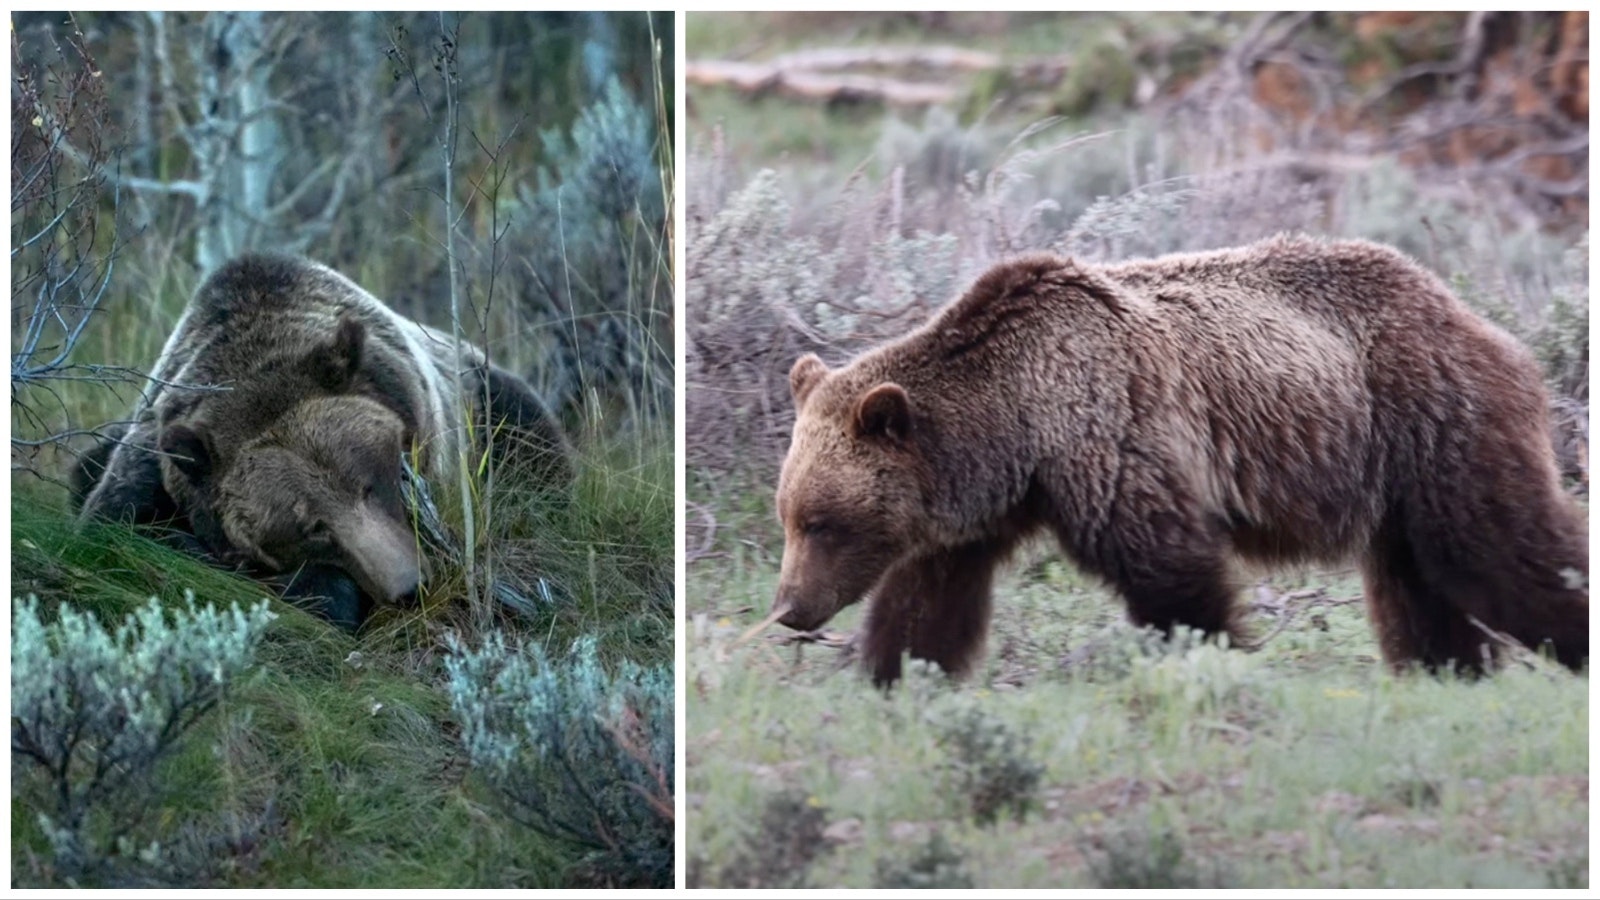 After being struck by a vehicle Oct. 9 along U.S. Highway 89 in Teton National Park, Wyoming’s beloved Grizzly 610 laid still for hours before finally rejoining her three yearling cubs. She was reported to be up and moving normally the next day.